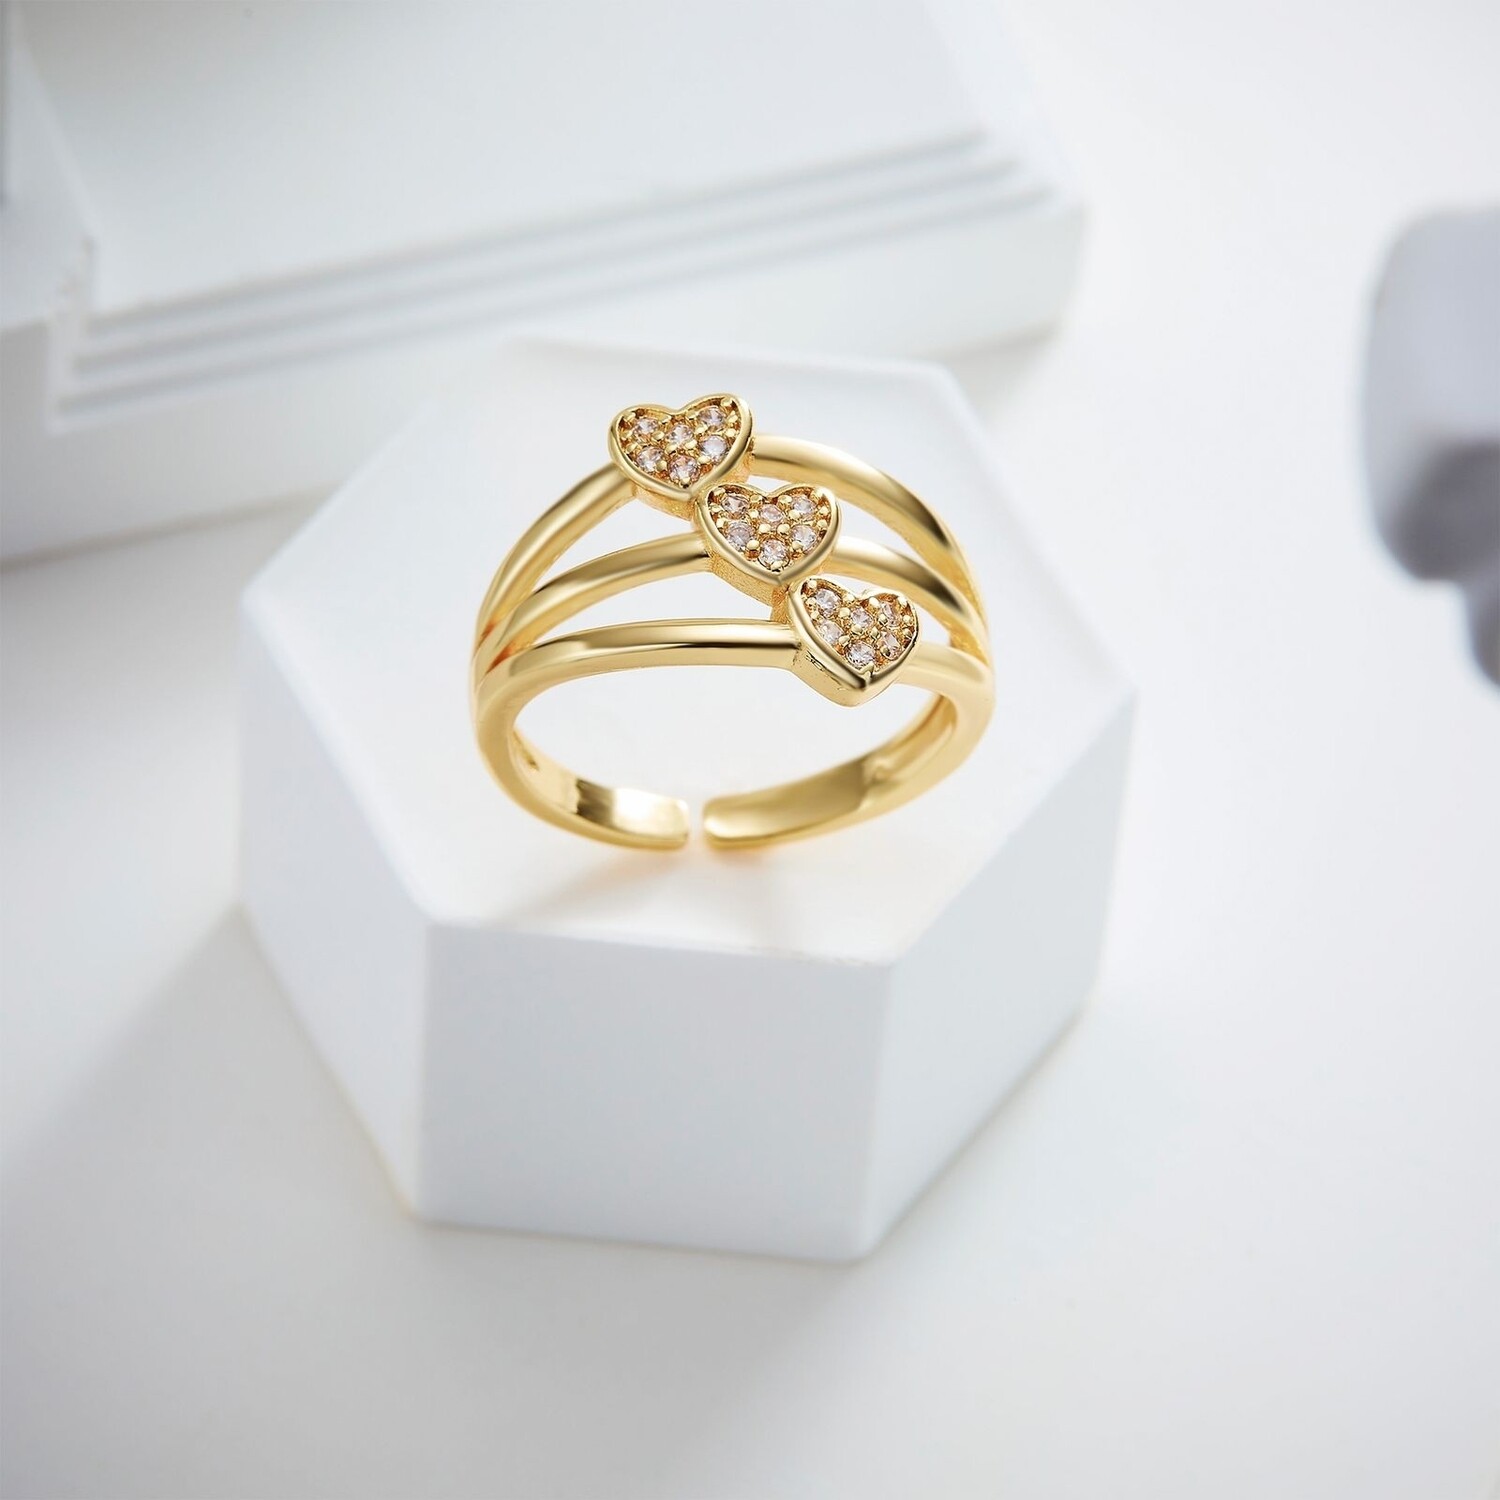 High profile New fashion 18k gold plated valentine ring gifts